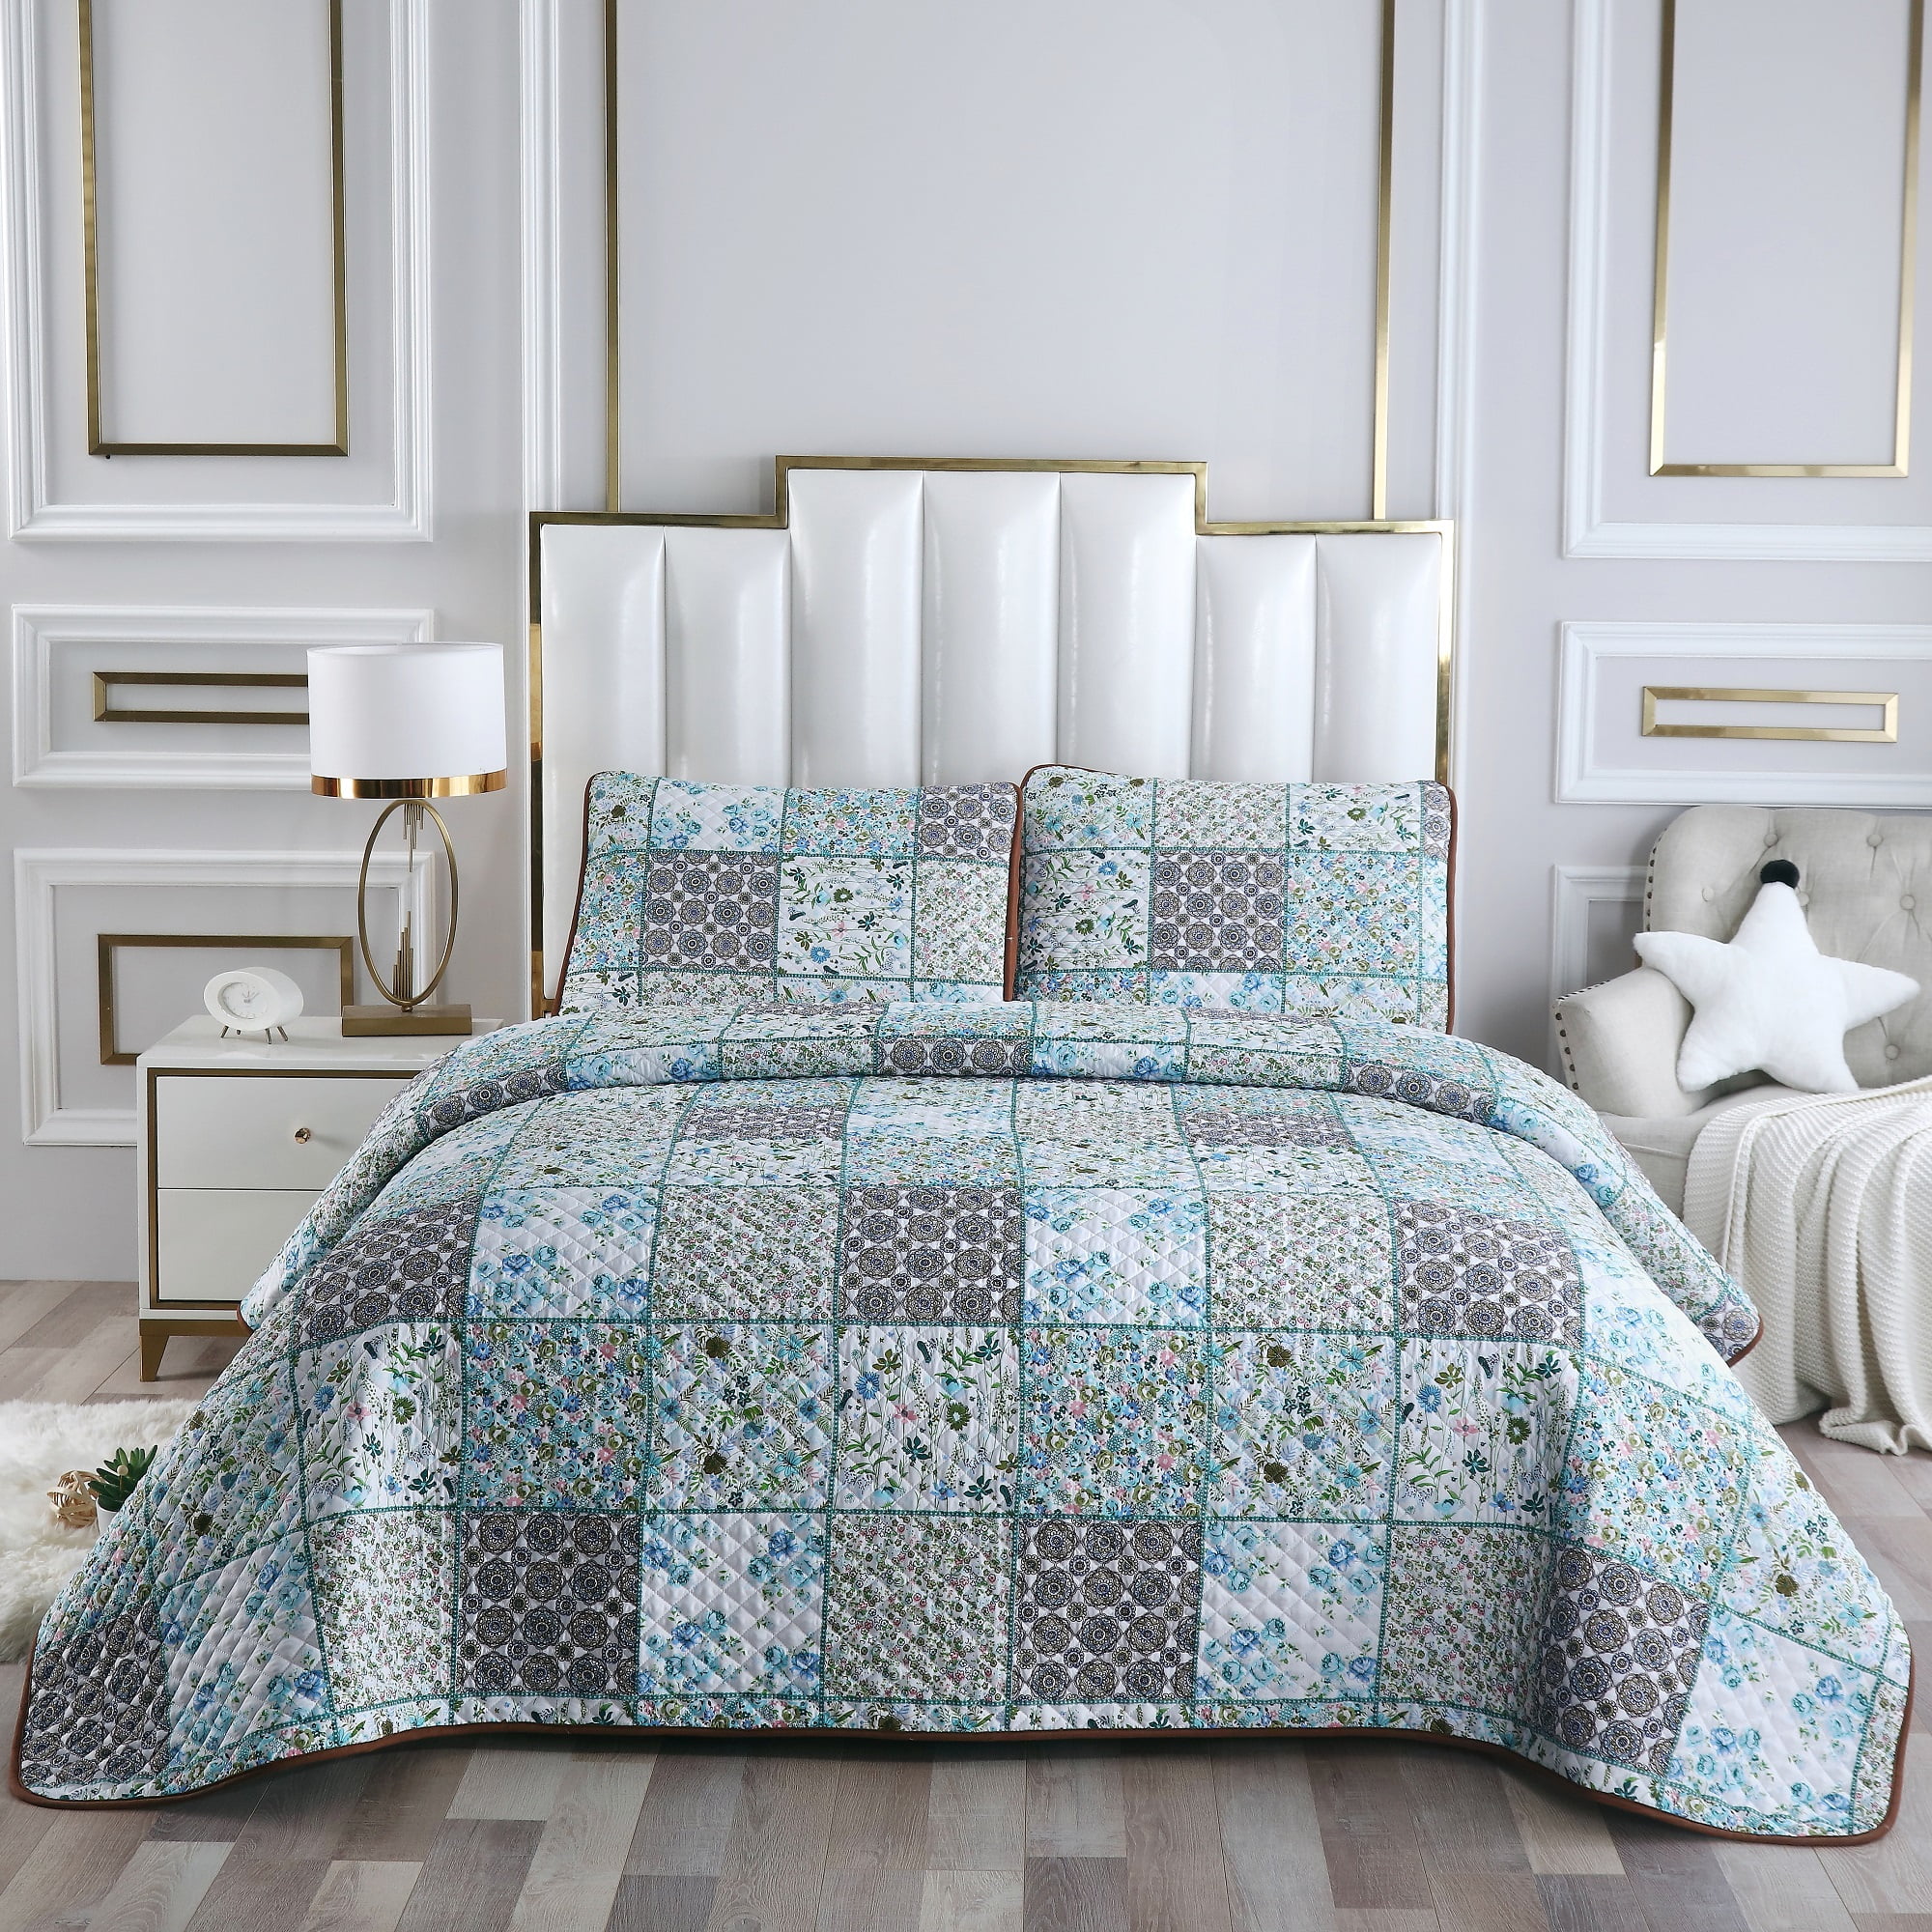 Embroidered Quilt Set King Size 3 Piece Bedspread Coverlet Bedding Green Aqua 